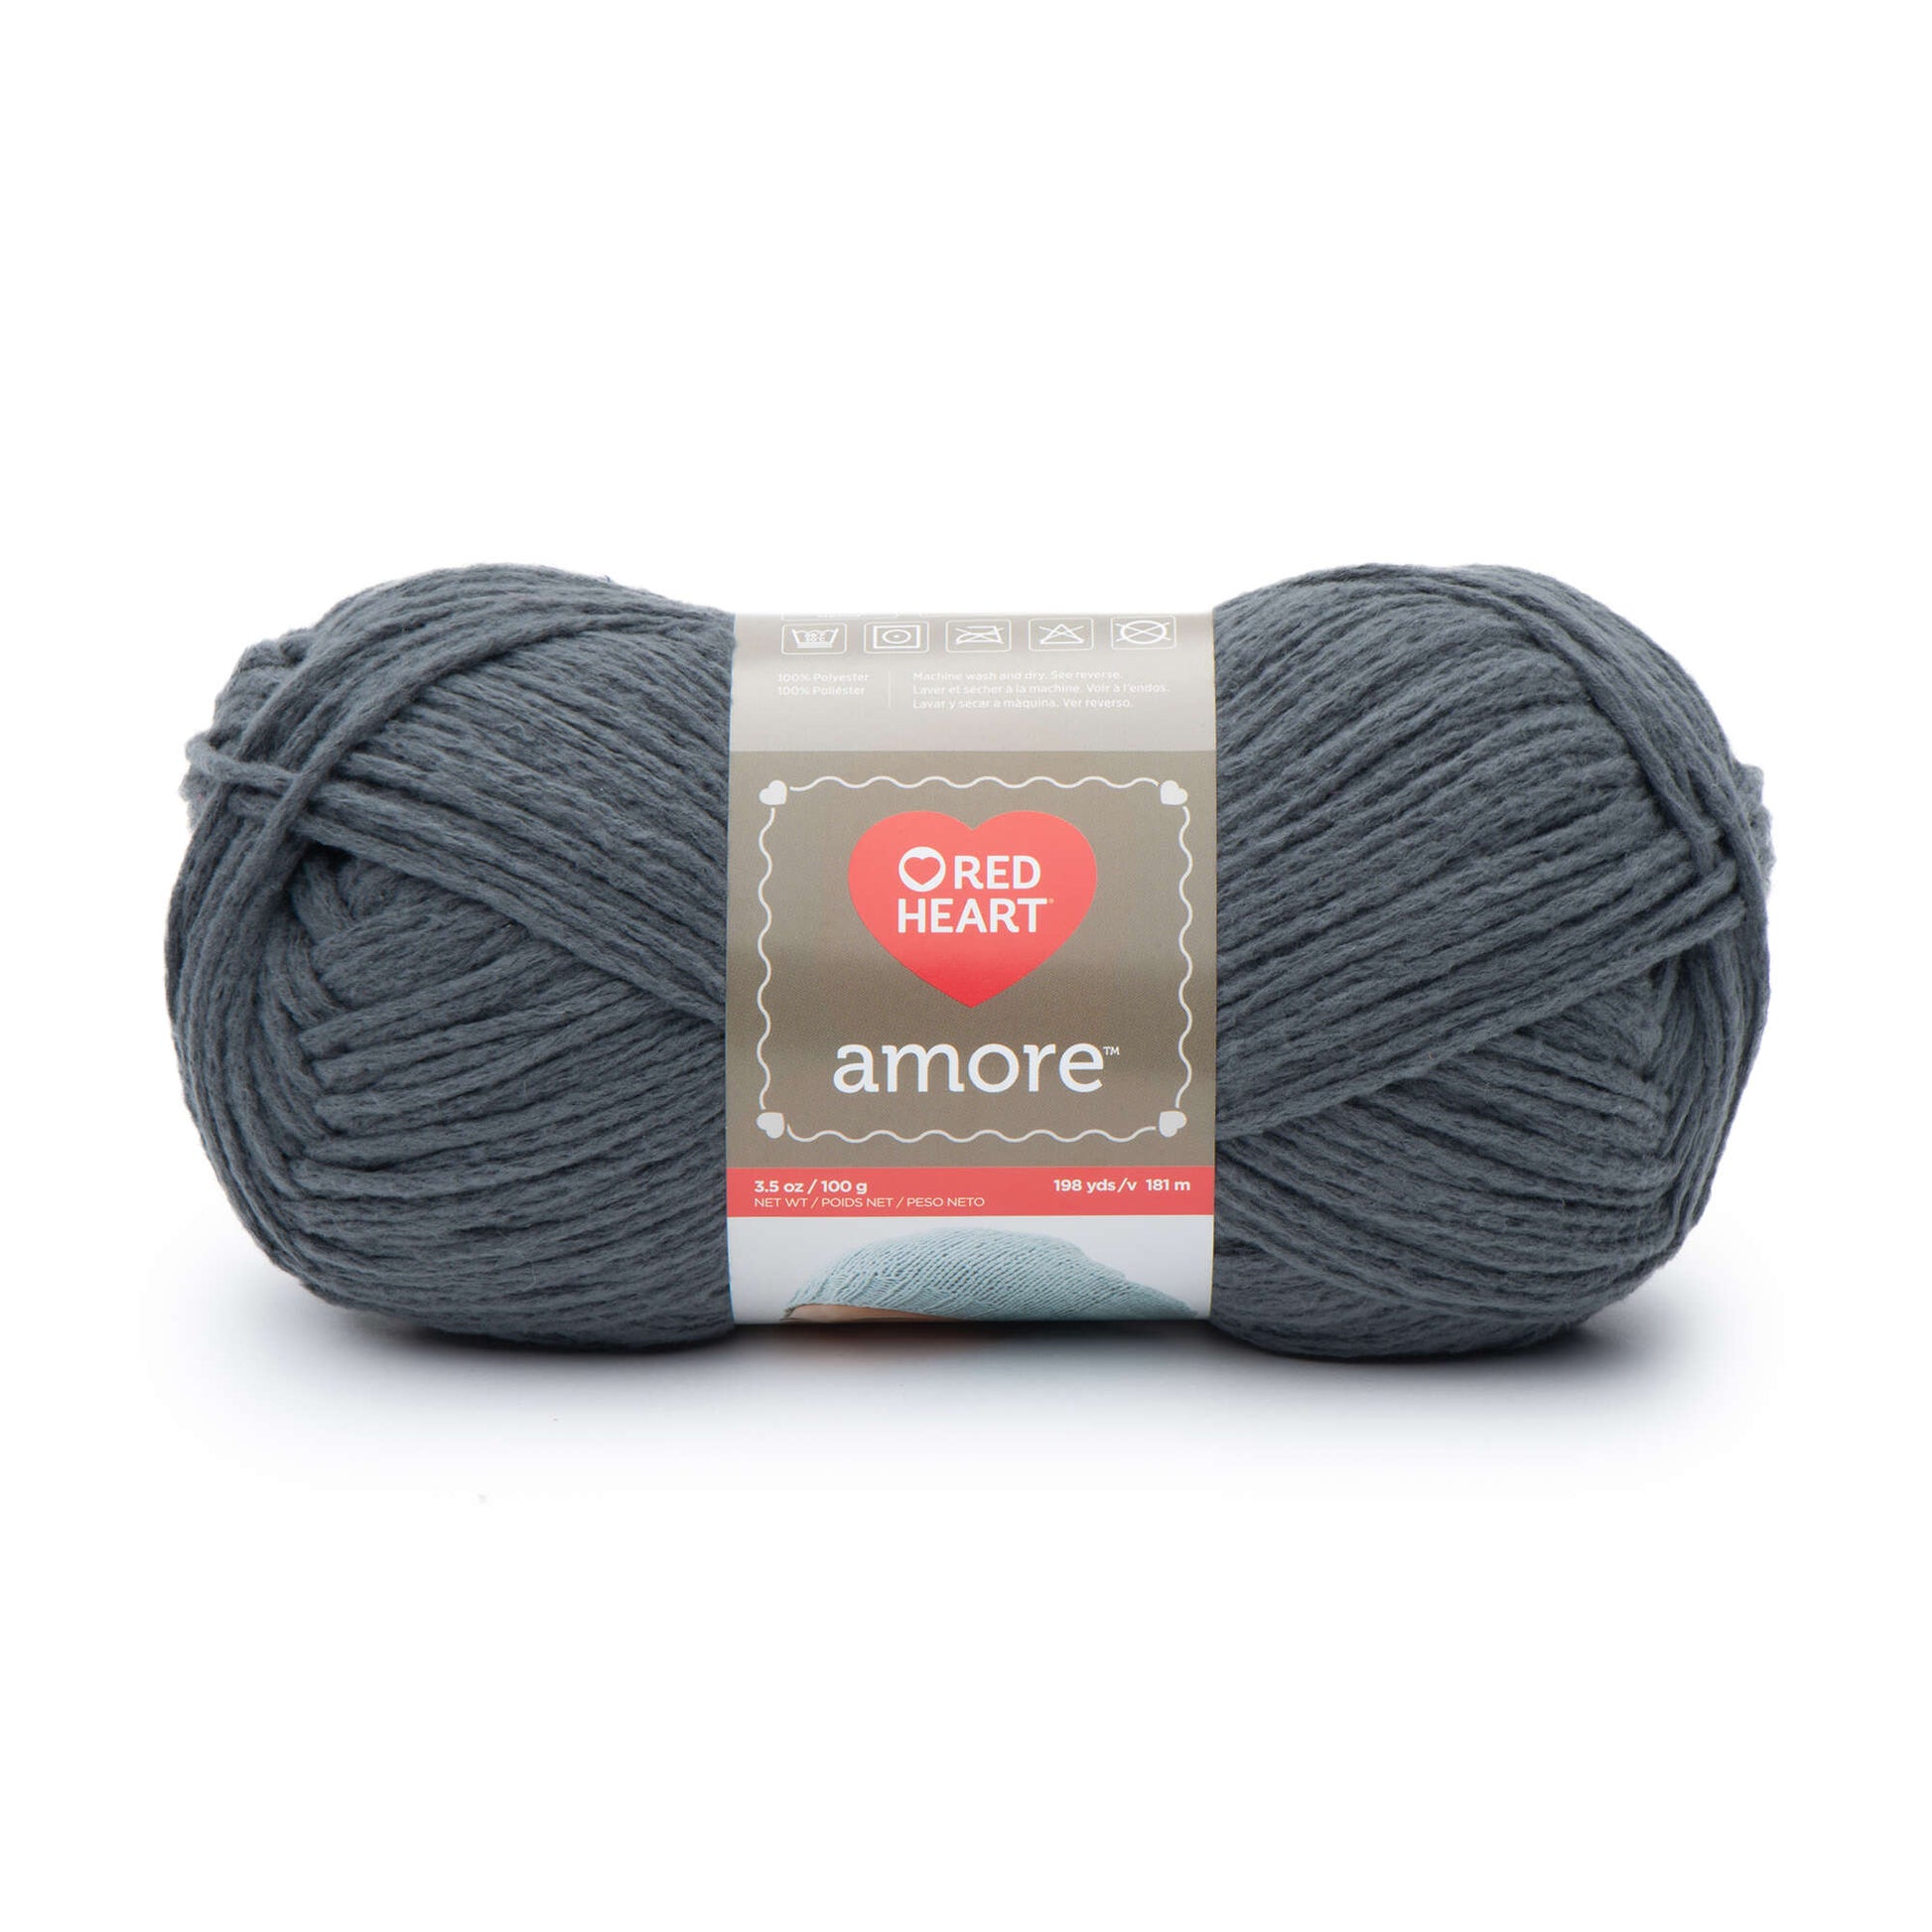 Red Heart Amore Yarn - Discontinued shades